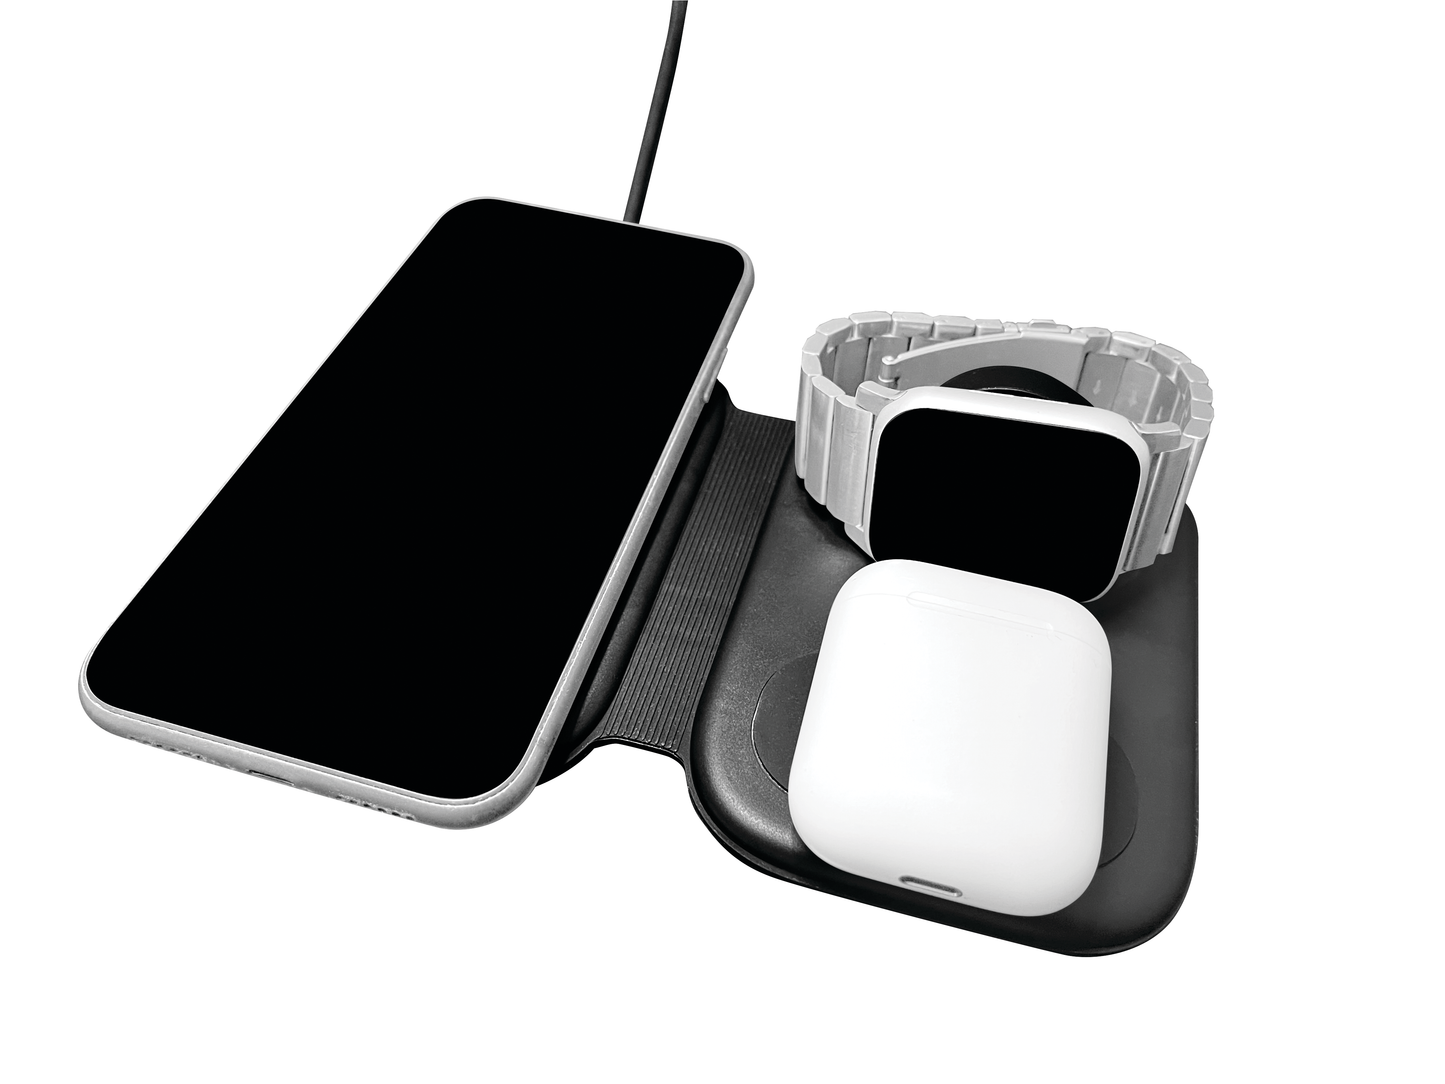 ITEM NUMBER 023754 3-IN-1 WIRELESS TRAVEL CHARGER 4 PIECES PER DISPLAY